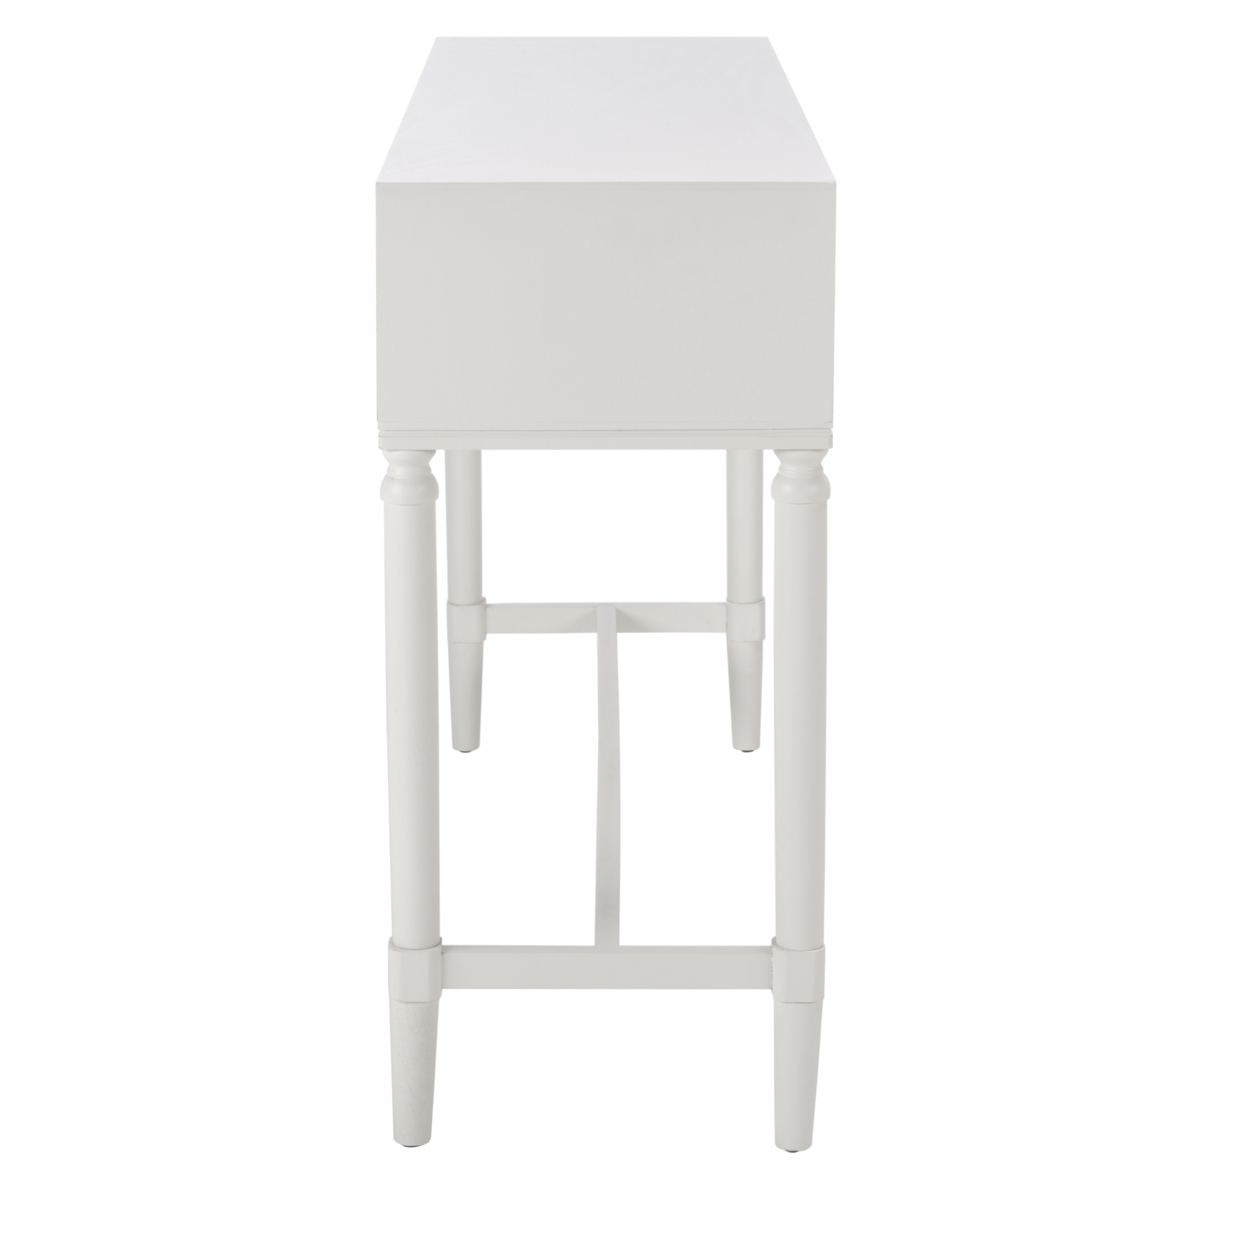 SAFAVIEH Aliyah 4-Drawer Console Table Distressed White